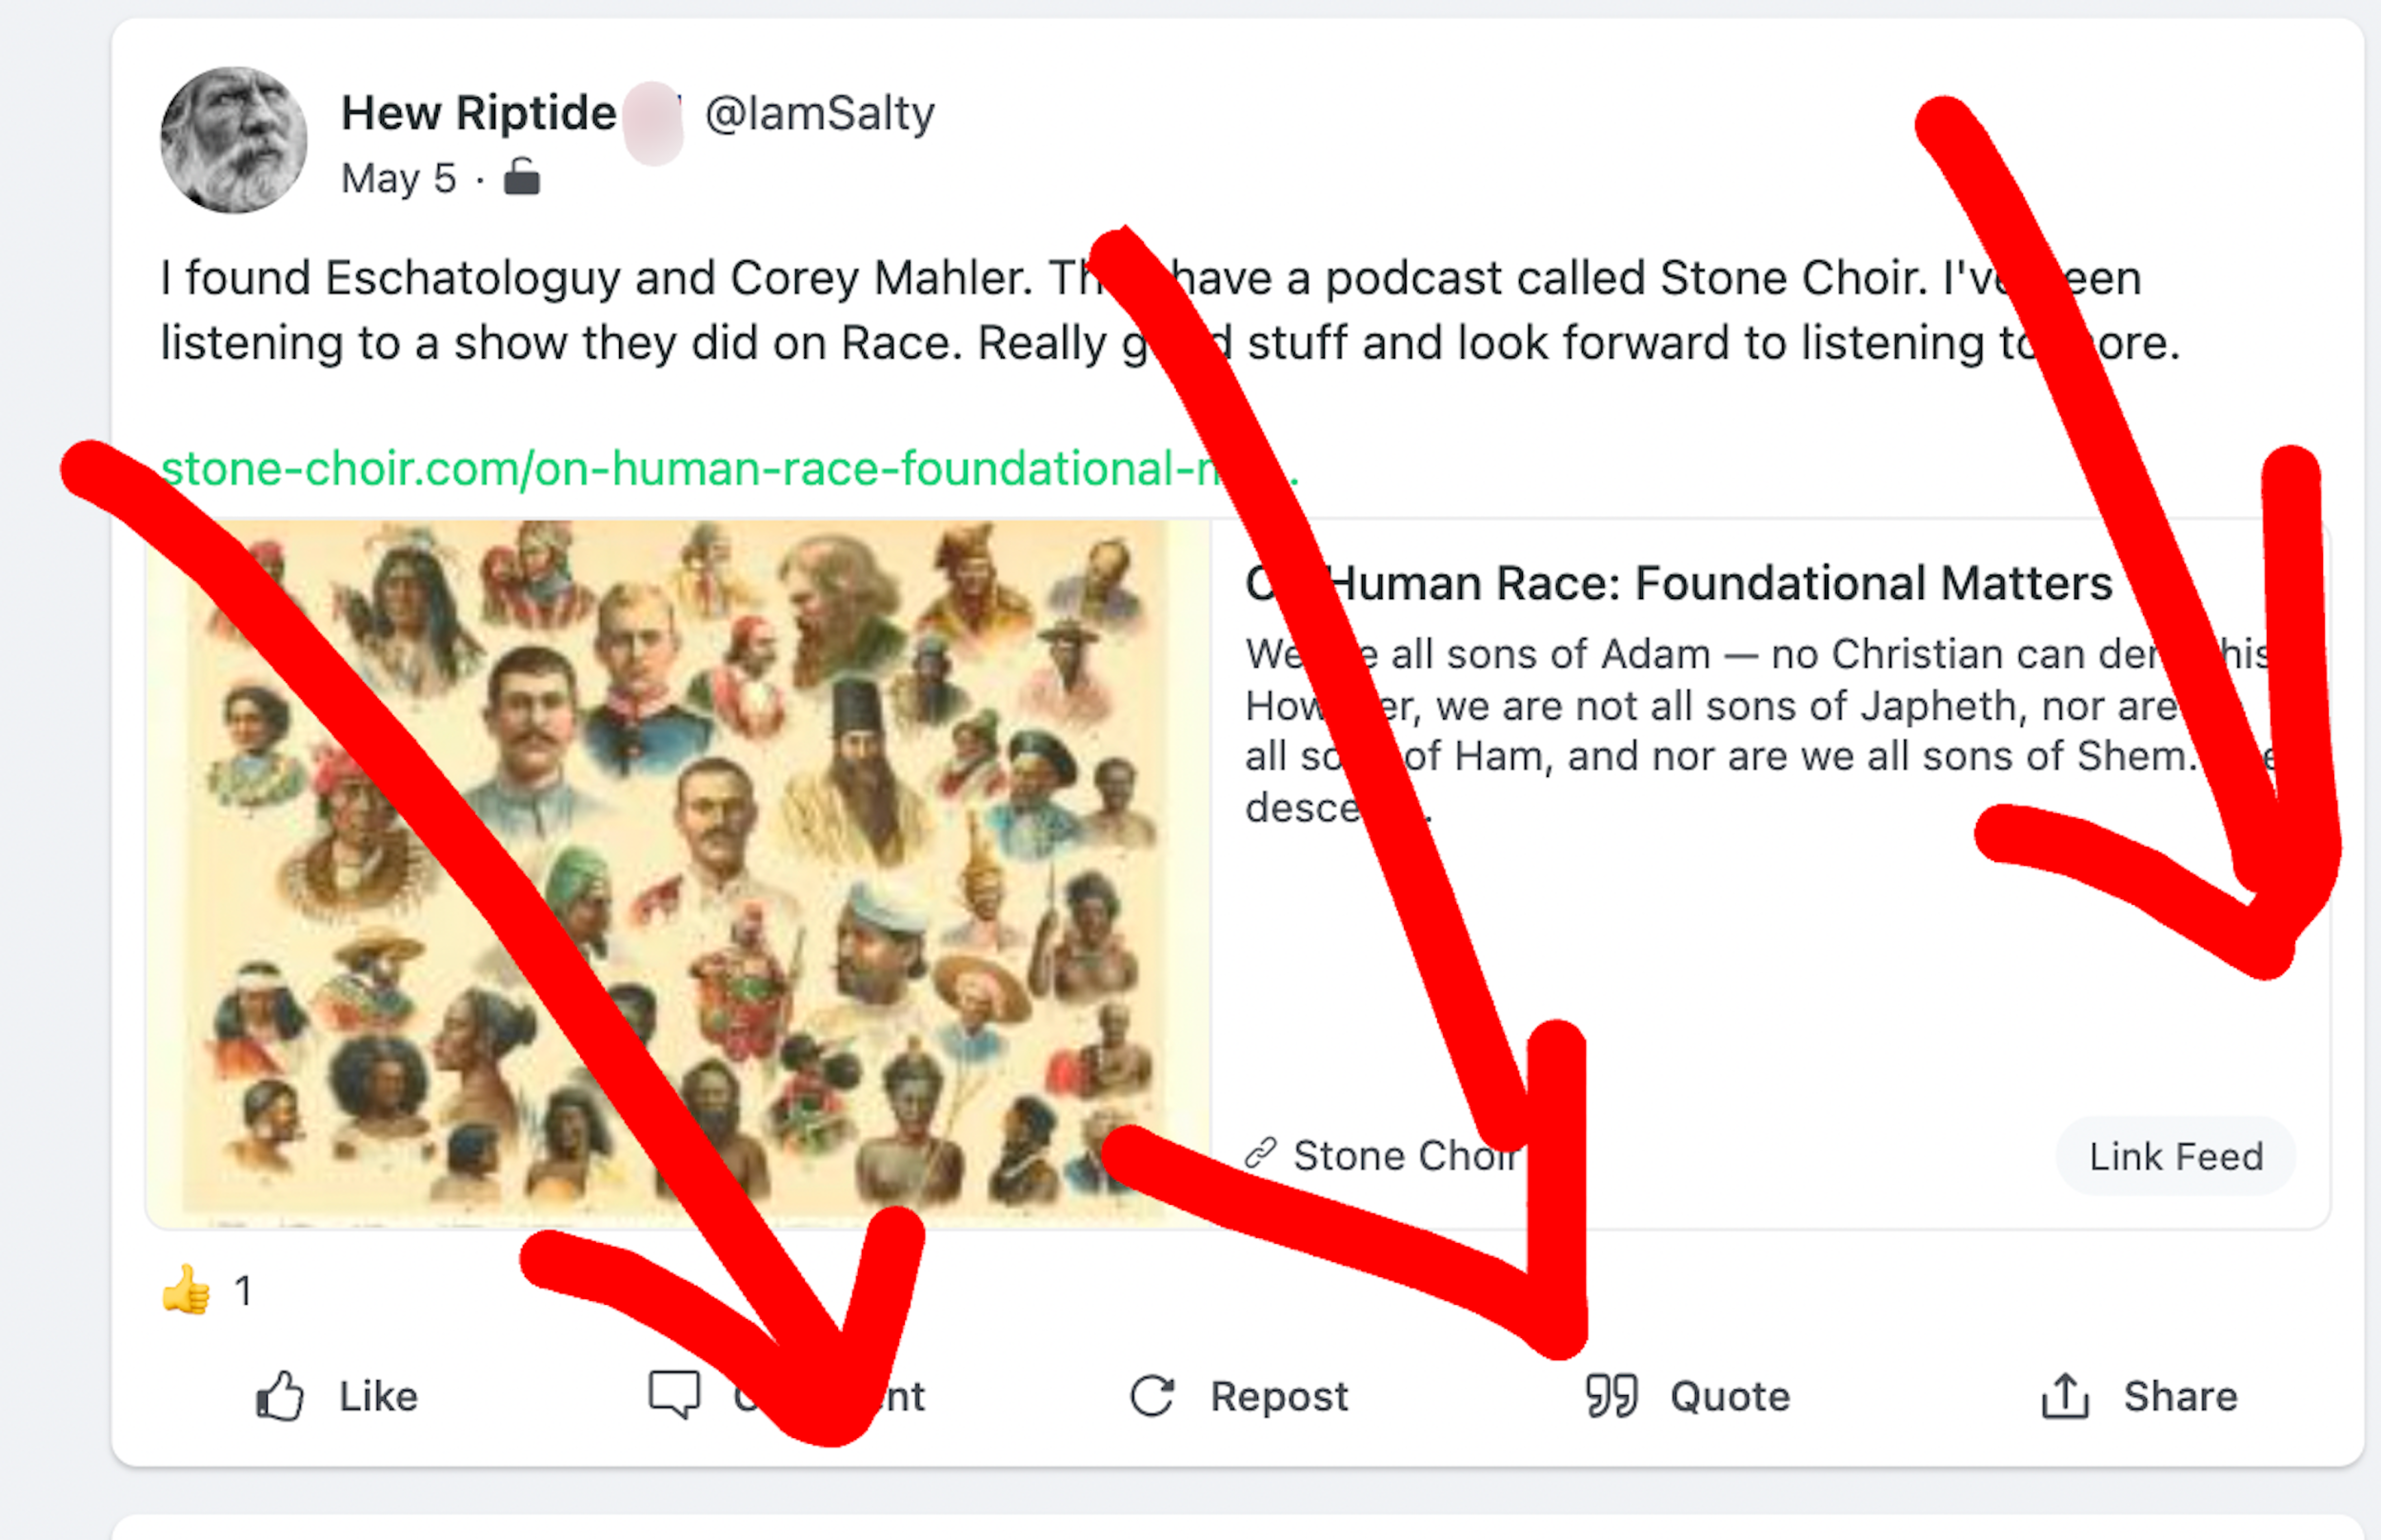 Gab user expressing excitement about Stone Choir episode on race, with preview pic of 19th century chart showing representatives of diff. races.